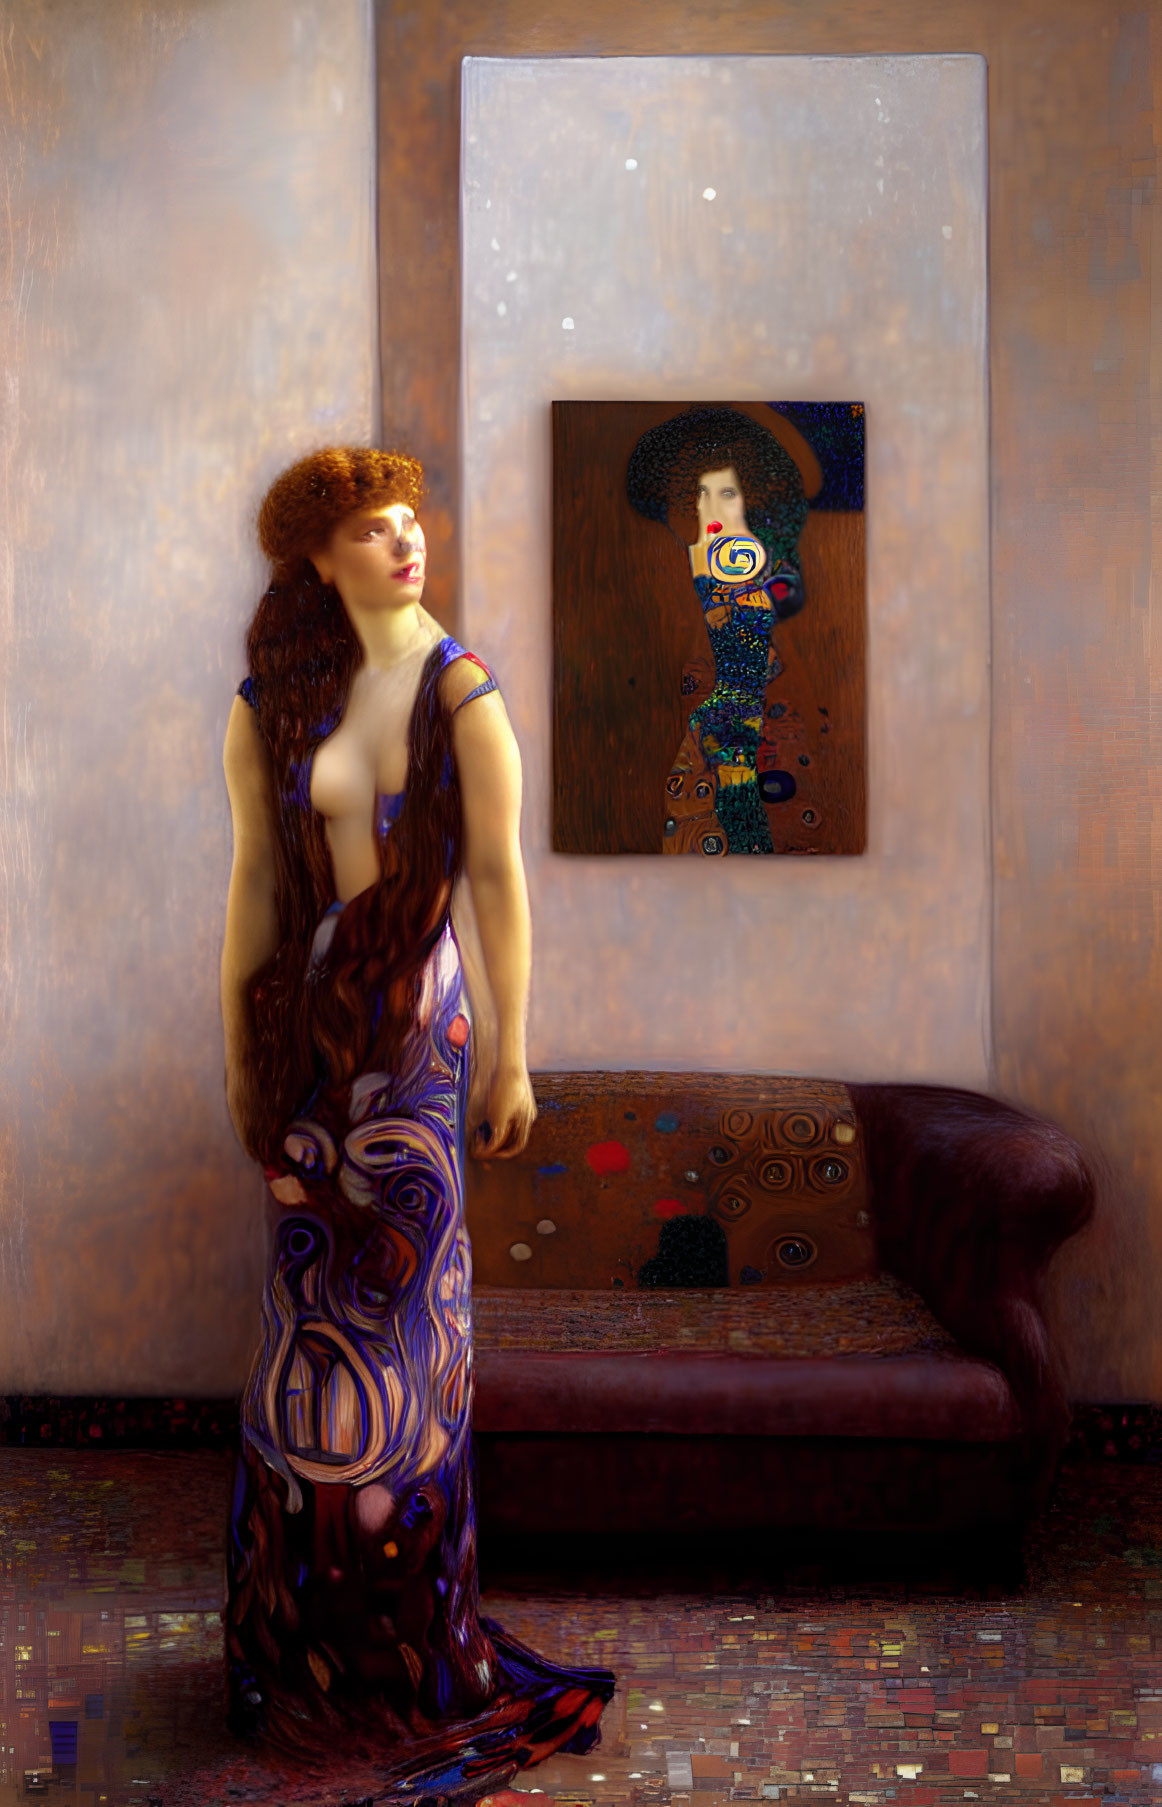 Red-haired woman in Klimt-inspired dress by sofa with Klimt painting.